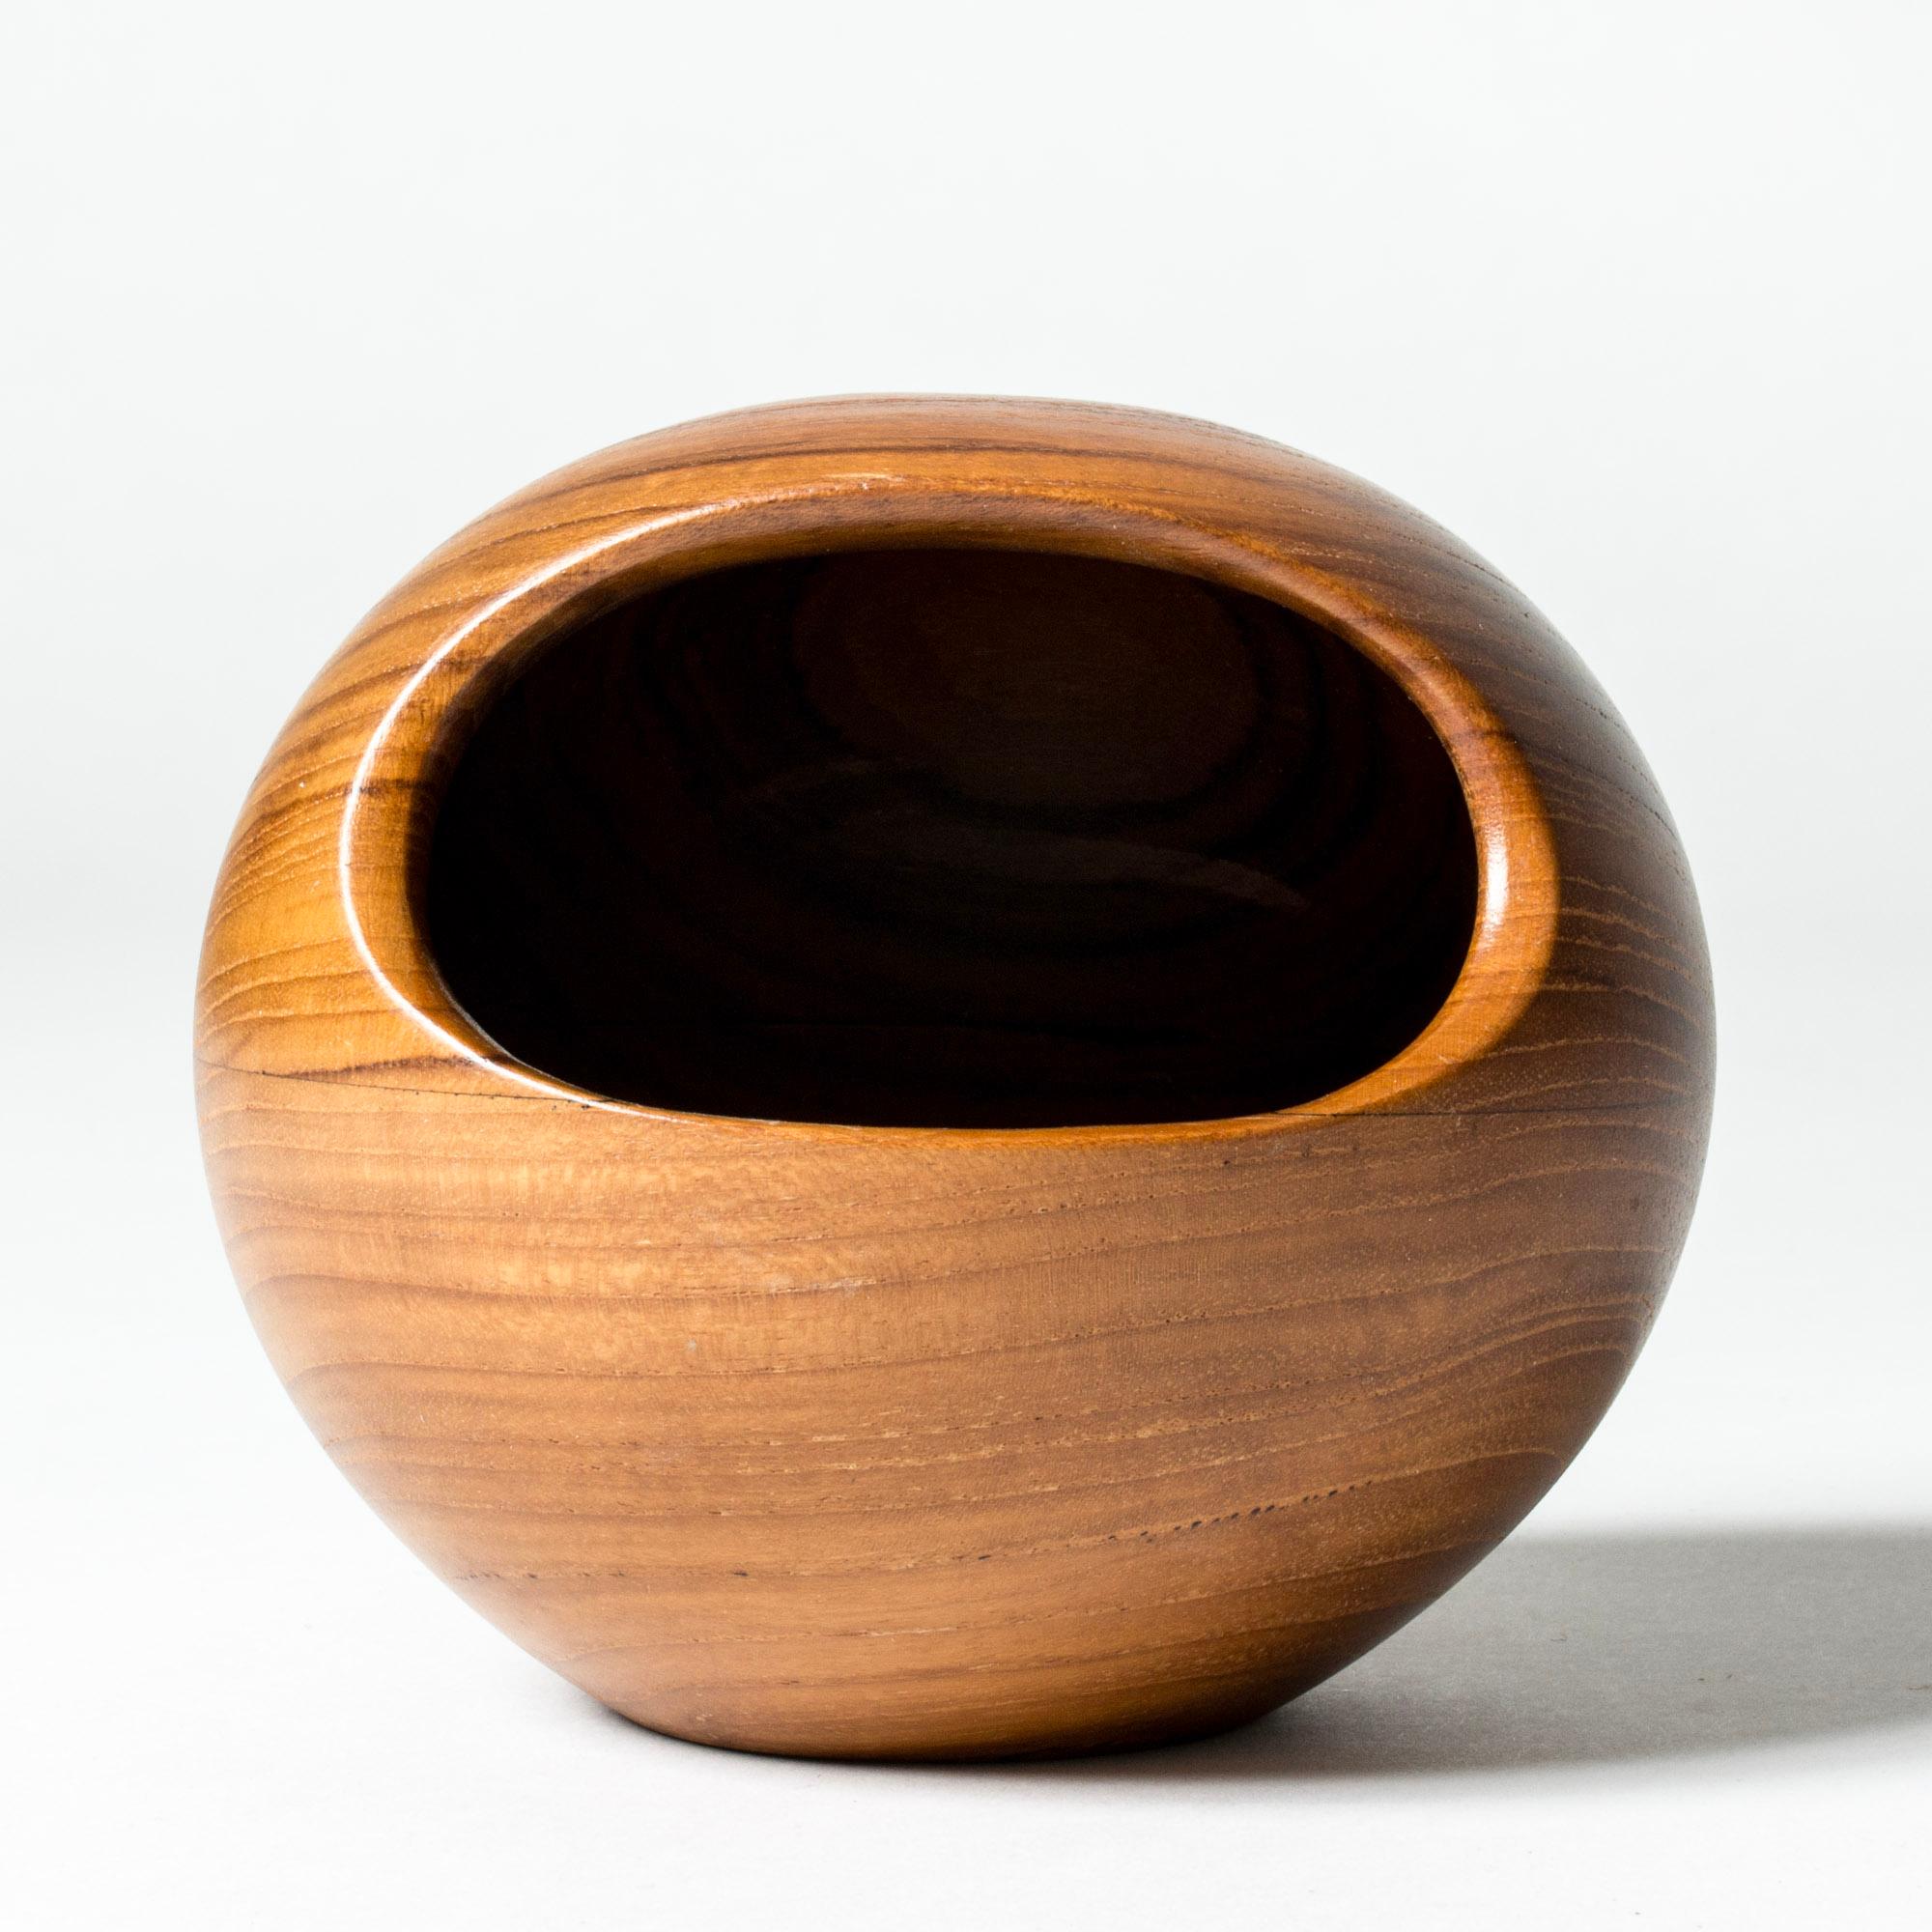 Lovely teak “nut cache” bowl by Sigvard Nilsson, in a smooth round form with an oval opening. Very decorative and sculptural, beautiful woodgrain.